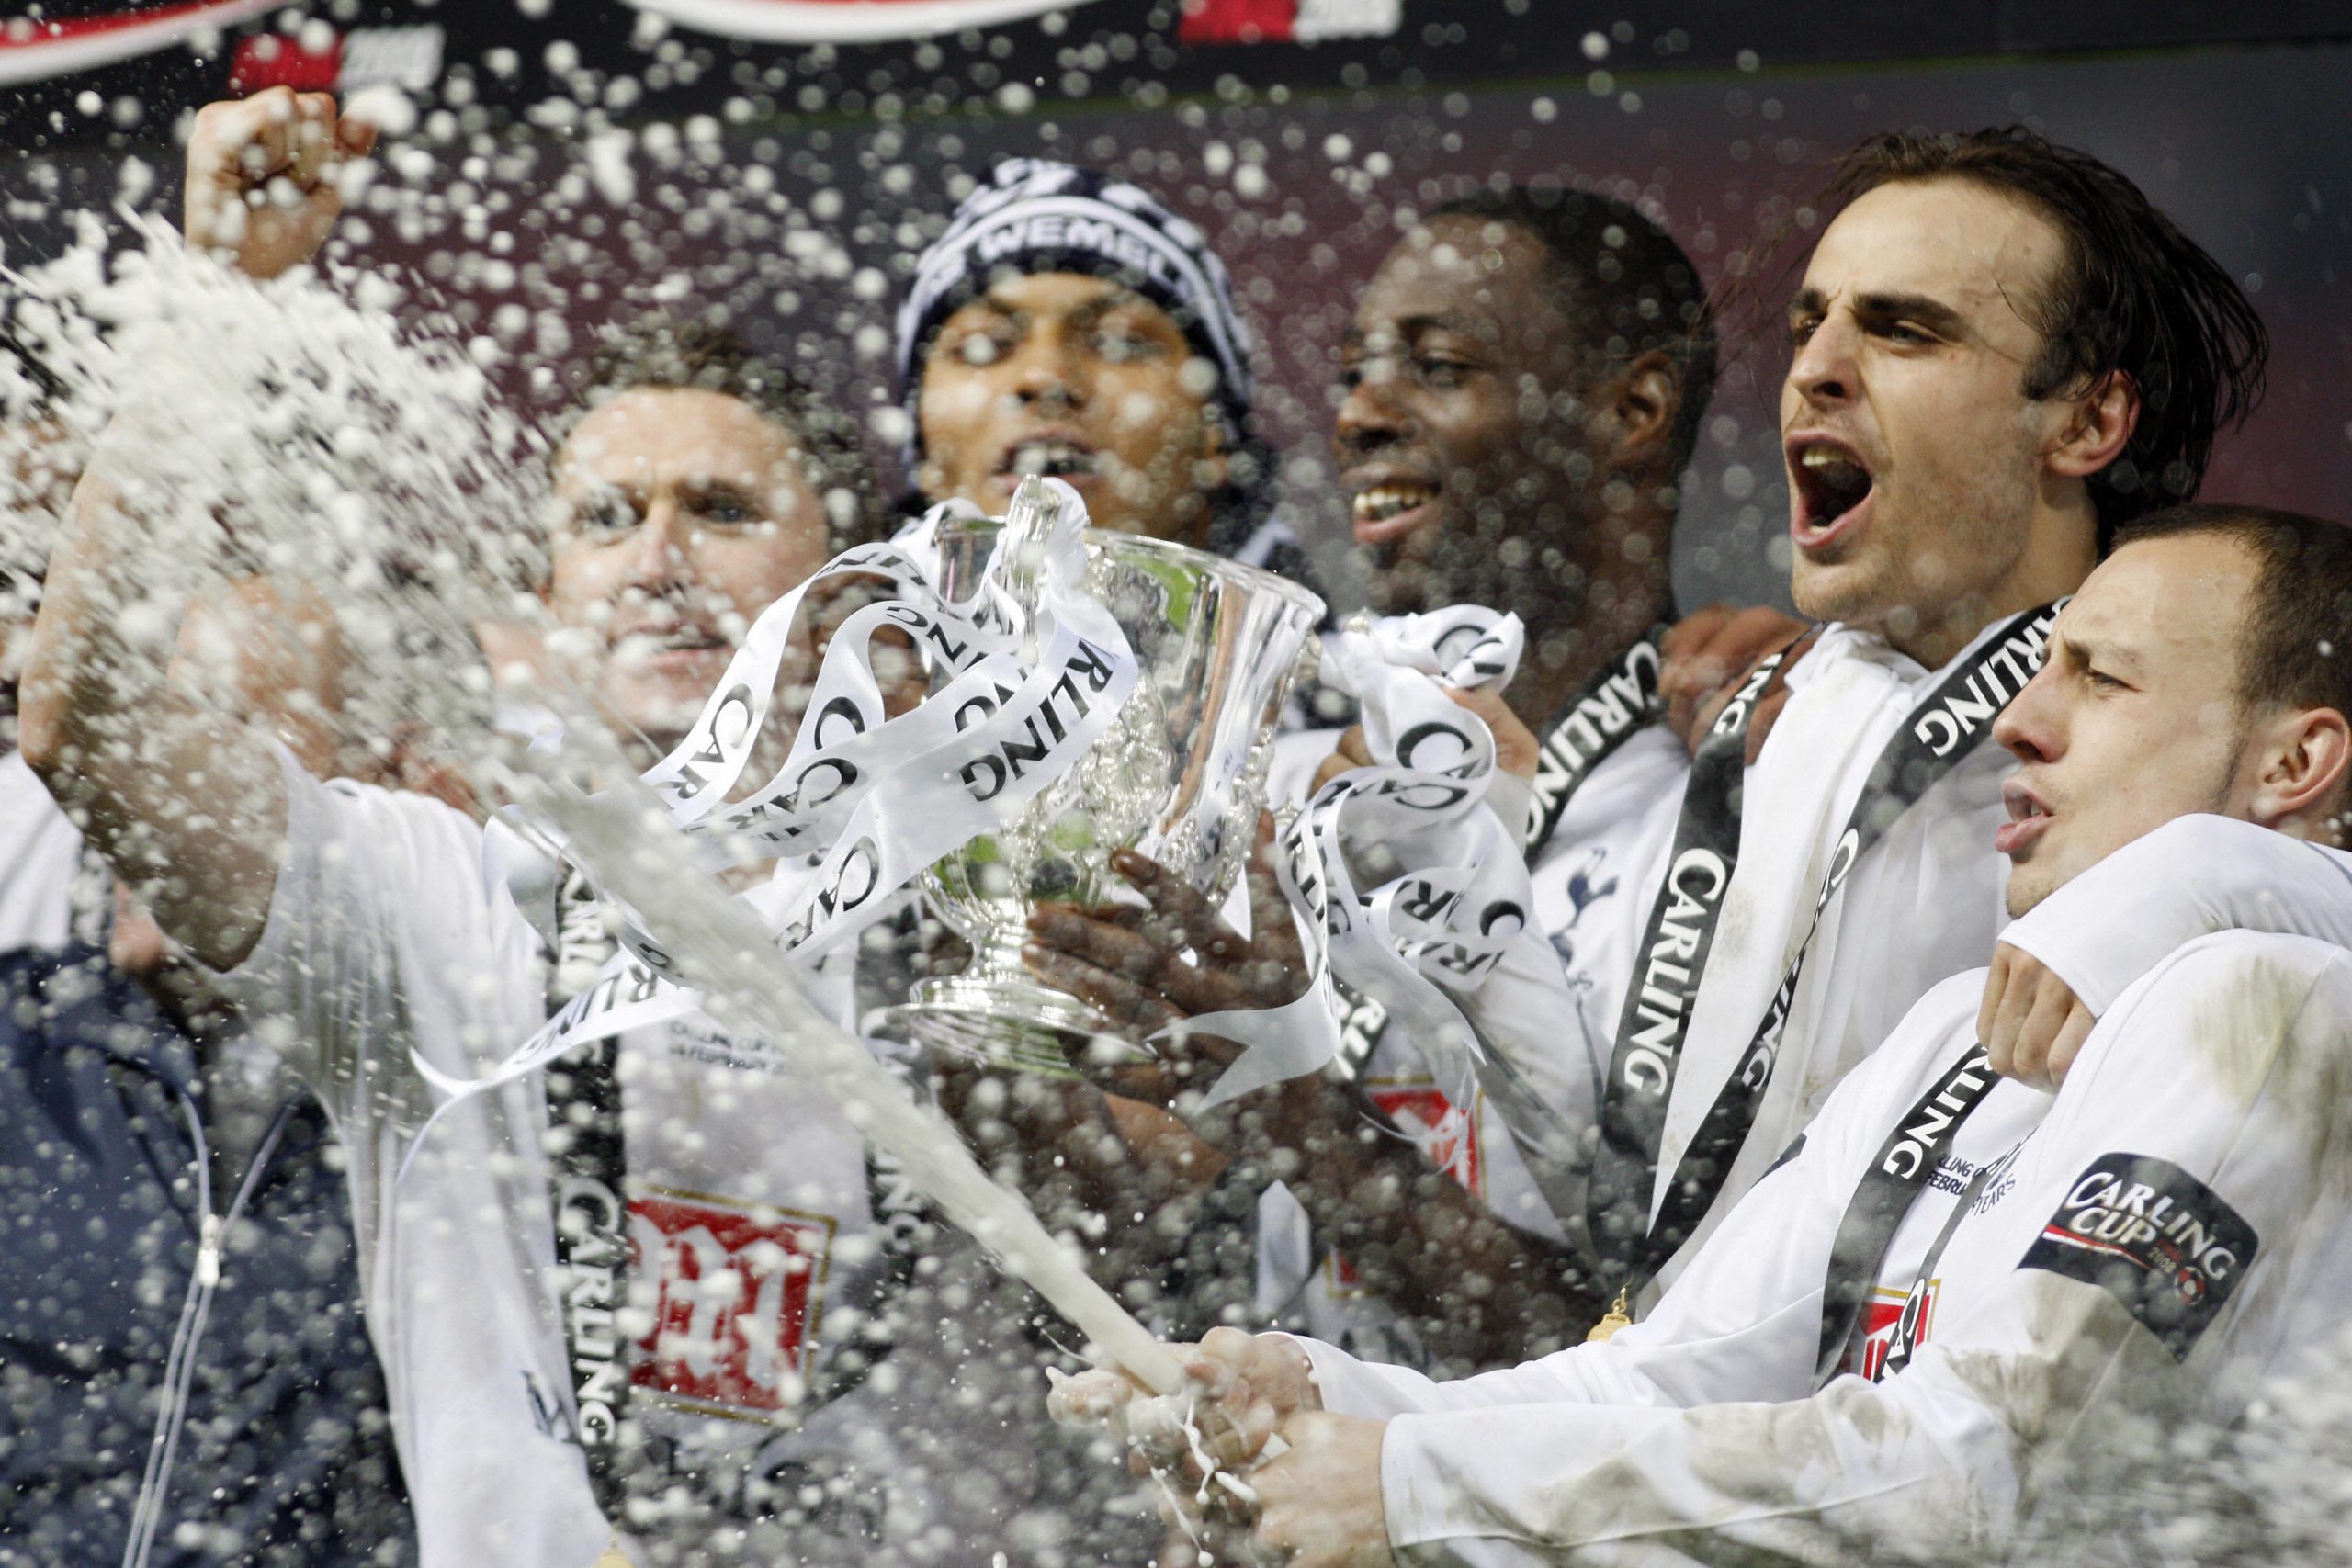 Tottenham Hotspur's Alan Hutton sprays champagne beside his teammates after winning the Carling Cup Final against Chelsea at Wembley Stadium.